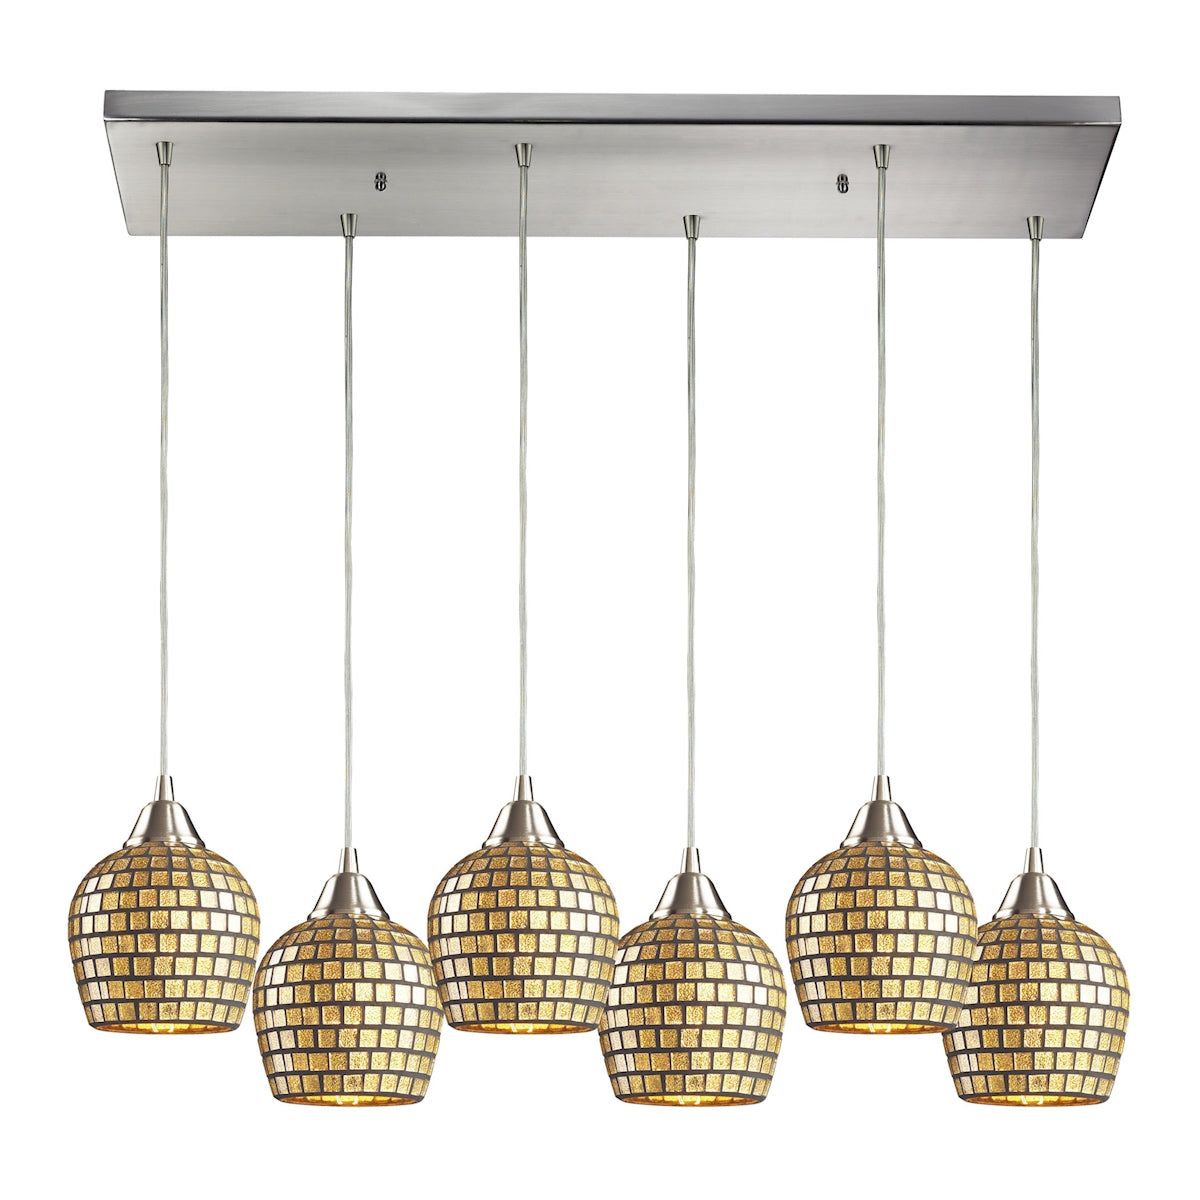 ELK Lighting 528-6RC-GLD Fusion 6-Light Rectangular Pendant Fixture in Satin Nickel with Gold Leaf Mosaic Glass